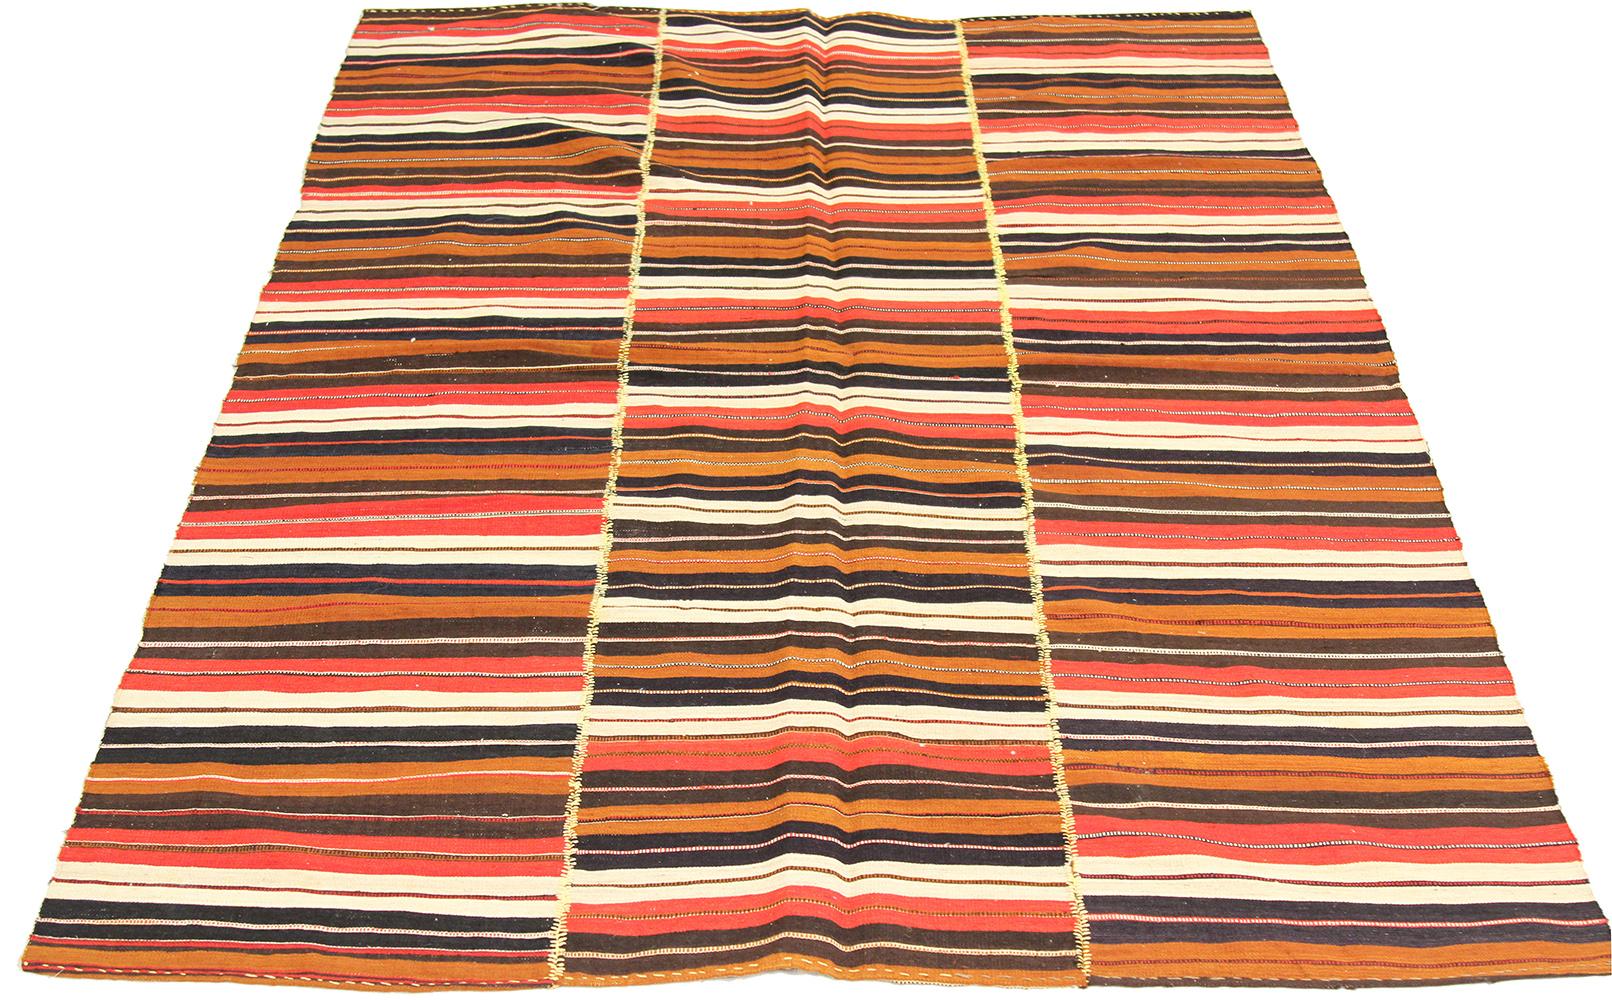 Persian rug handwoven from the finest sheep’s wool and colored with all-natural vegetable dyes that are safe for humans and pets. It’s a Kilim style flat-weave design featuring striking stripes in red, black, and brown over an ivory field. It’s a